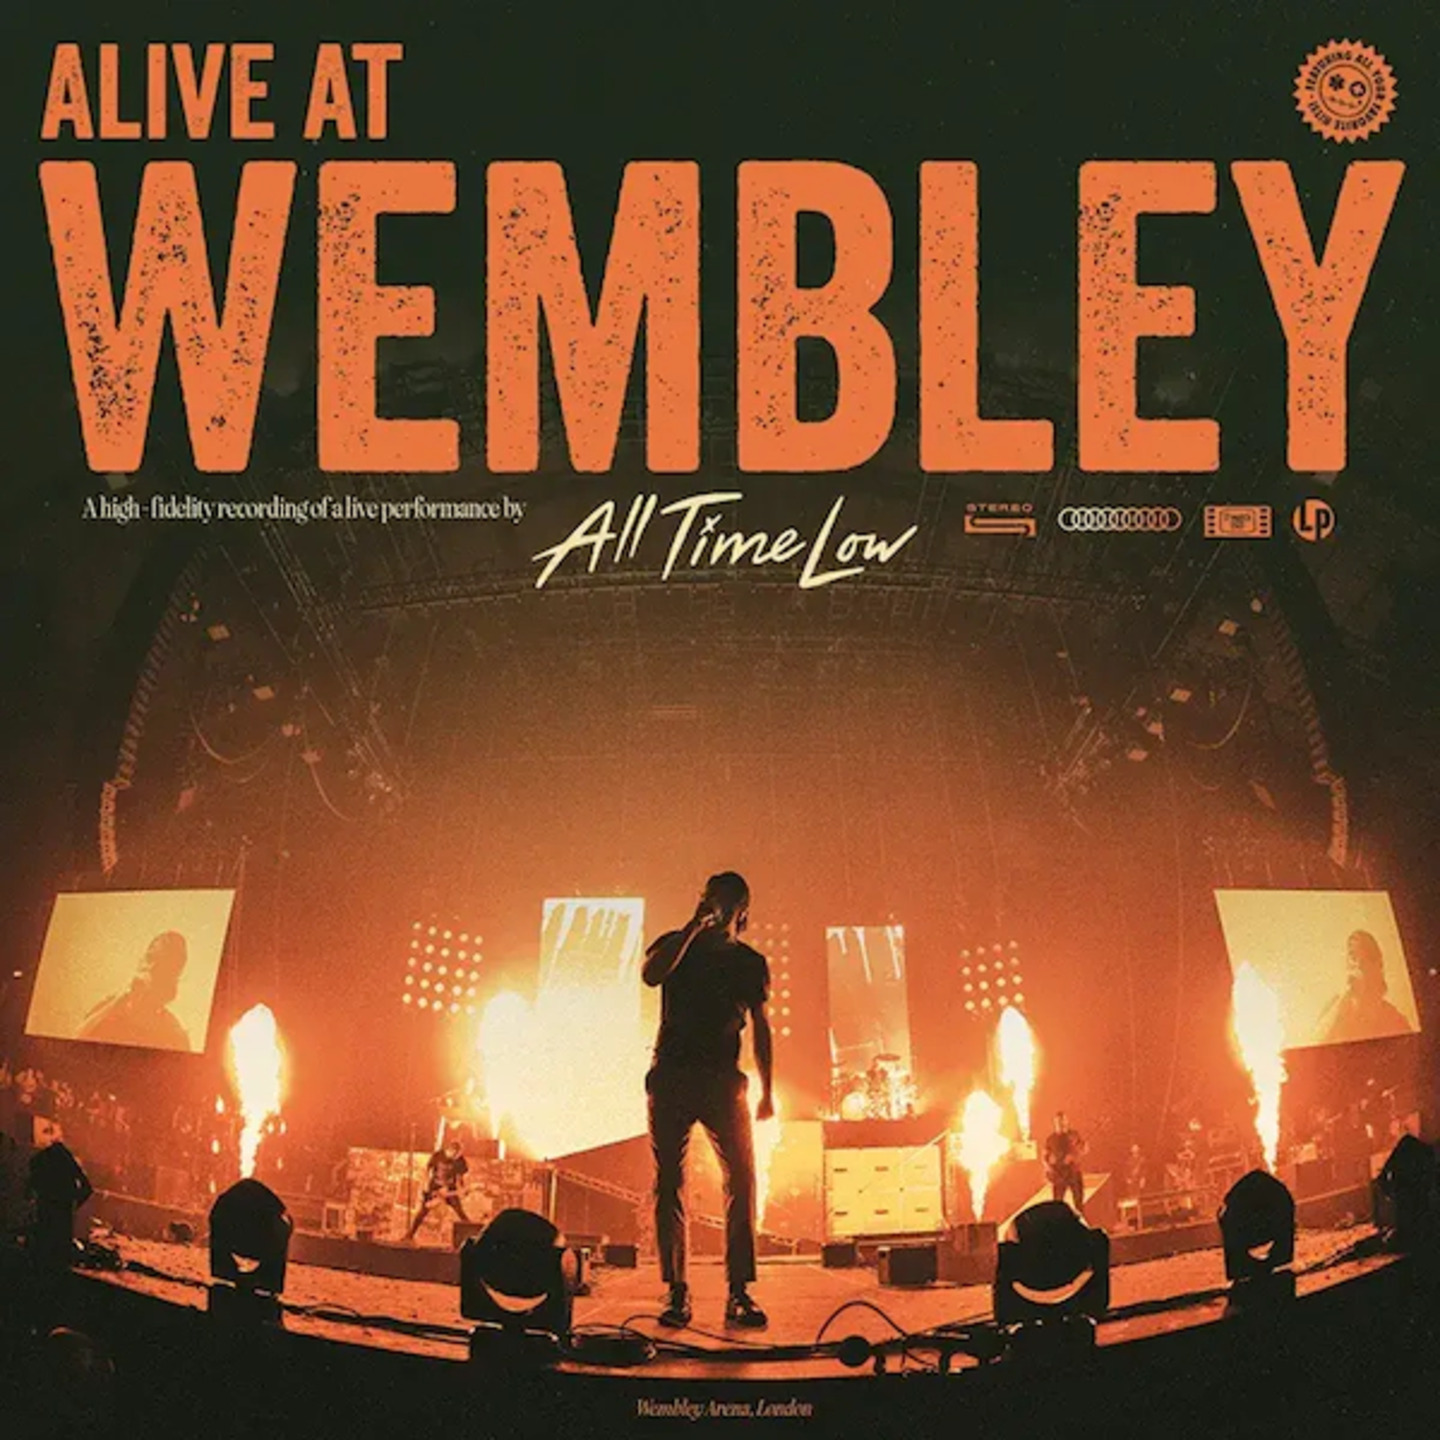 ALL TIME LOW - Alive At Wembley Tangerine  Lemon Opaque Galaxy vinyl